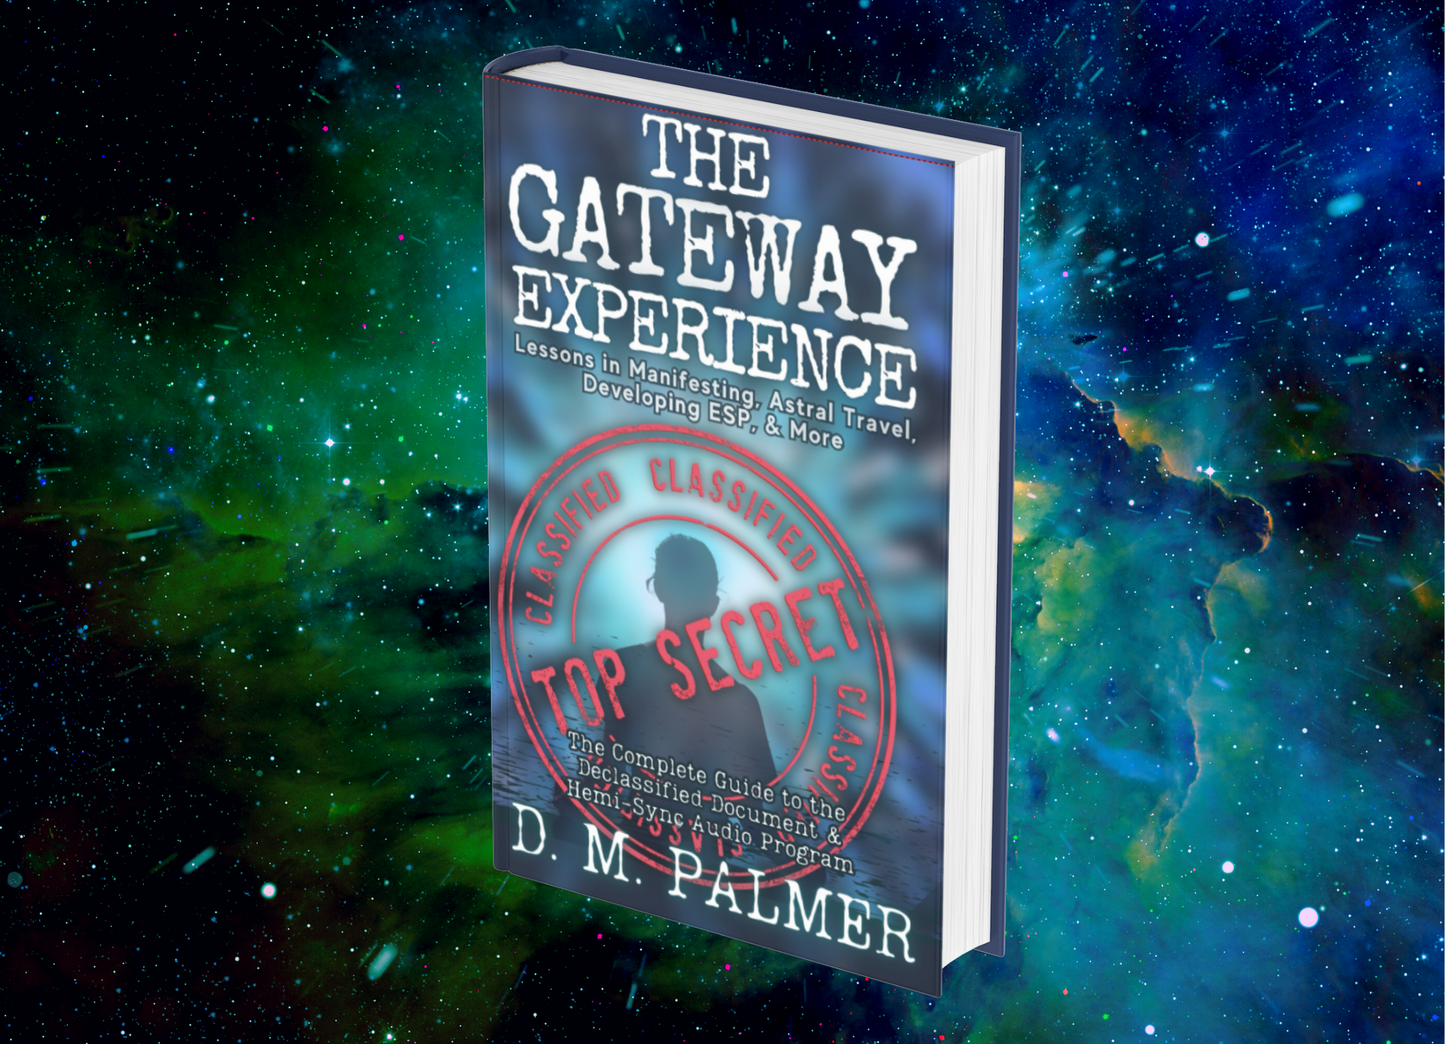 The Gateway Experience: Lessons in Manifesting, Astral Travel, Developing ESP, & More: The Complete Guide to the Declassified Document & Hemi-Sync(r) Audio Program